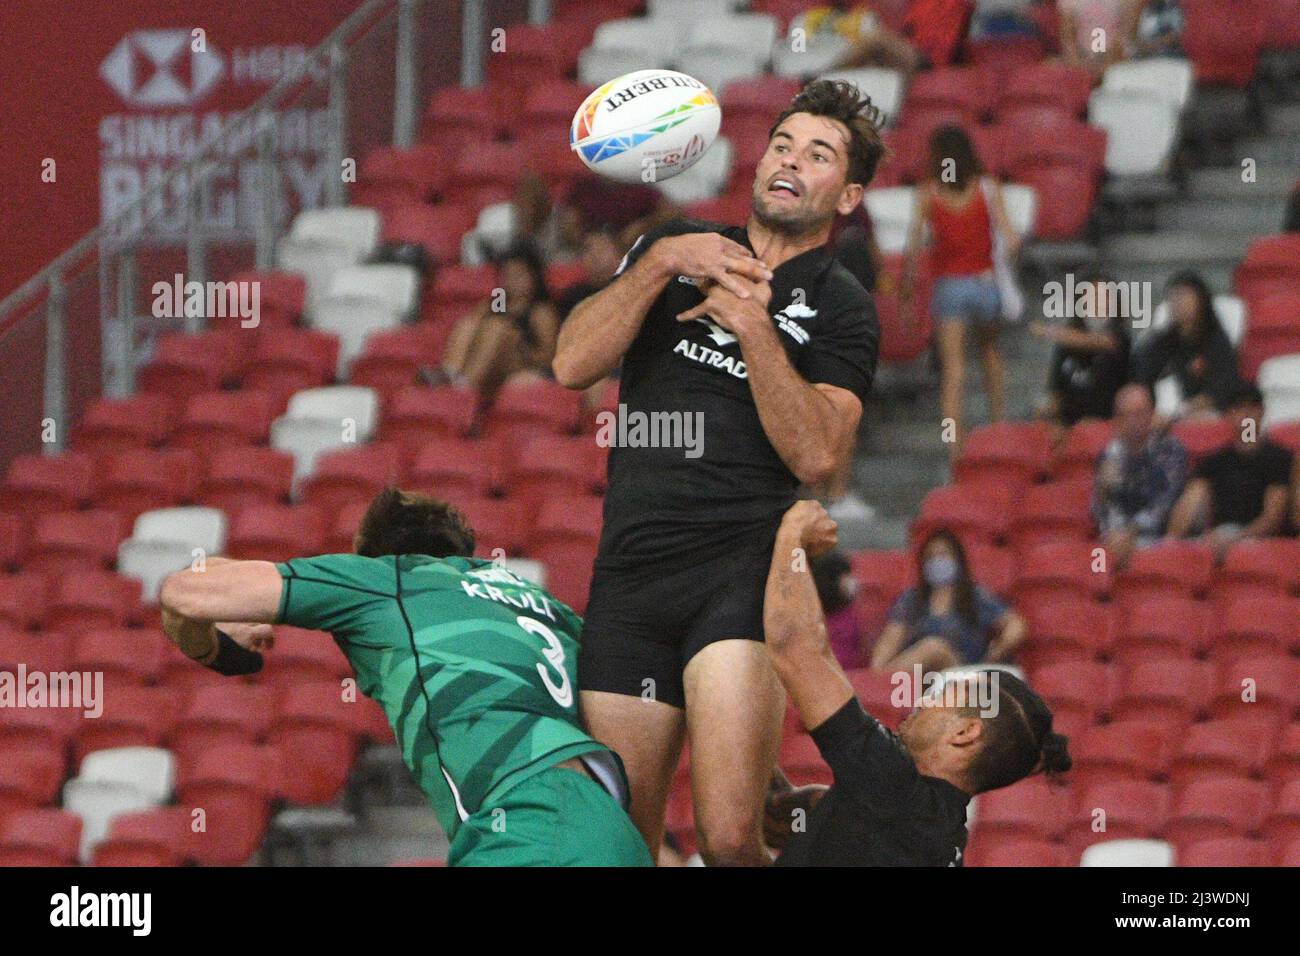 Singapore. 10th Apr, 2022. Andrew Knewstubb (C) of New Zealand competes during the semifinal between Ireland and New Zealand at the HSBC World Rugby Sevens Singapore stop, held in the National Stadium on April 10, 2022. Credit: Then Chih Wey/Xinhua/Alamy Live News Stock Photo